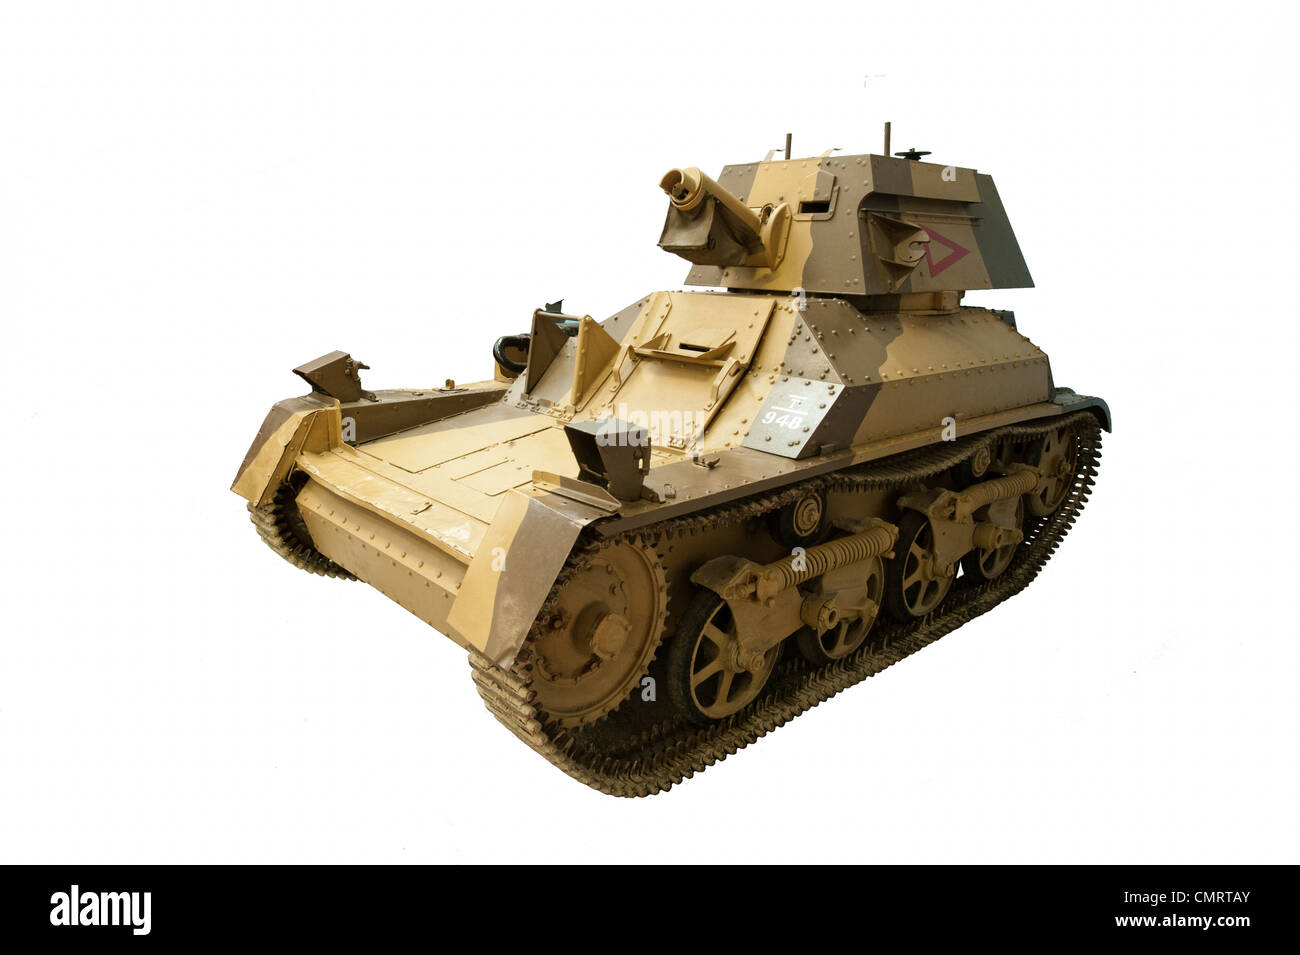 A cut out of a Light Tank Mk IIa in service from 1931 to 1940 used by British Forces early in WW2 Stock Photo